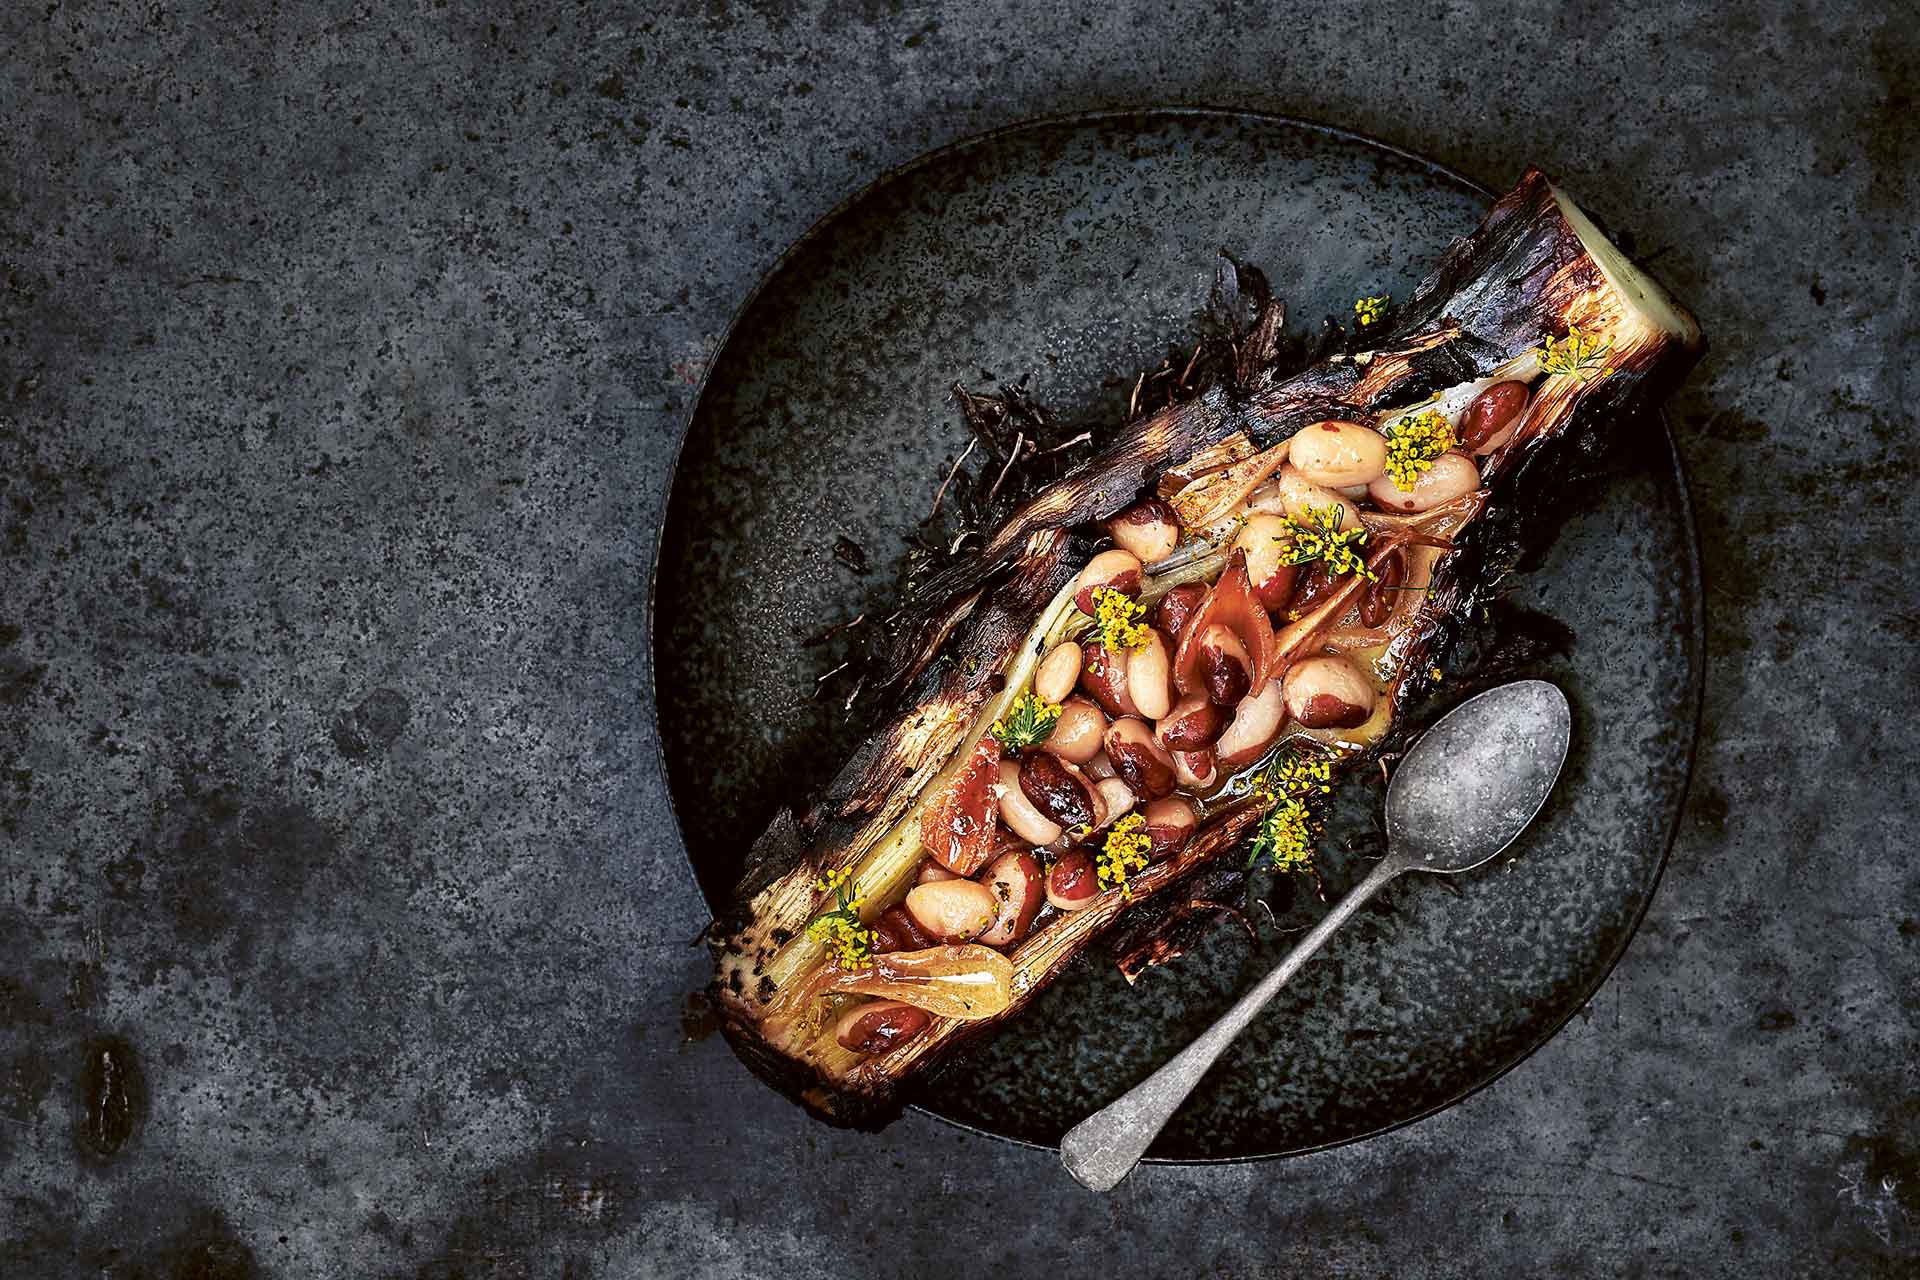 try roasting leeks for your next veggie bbq